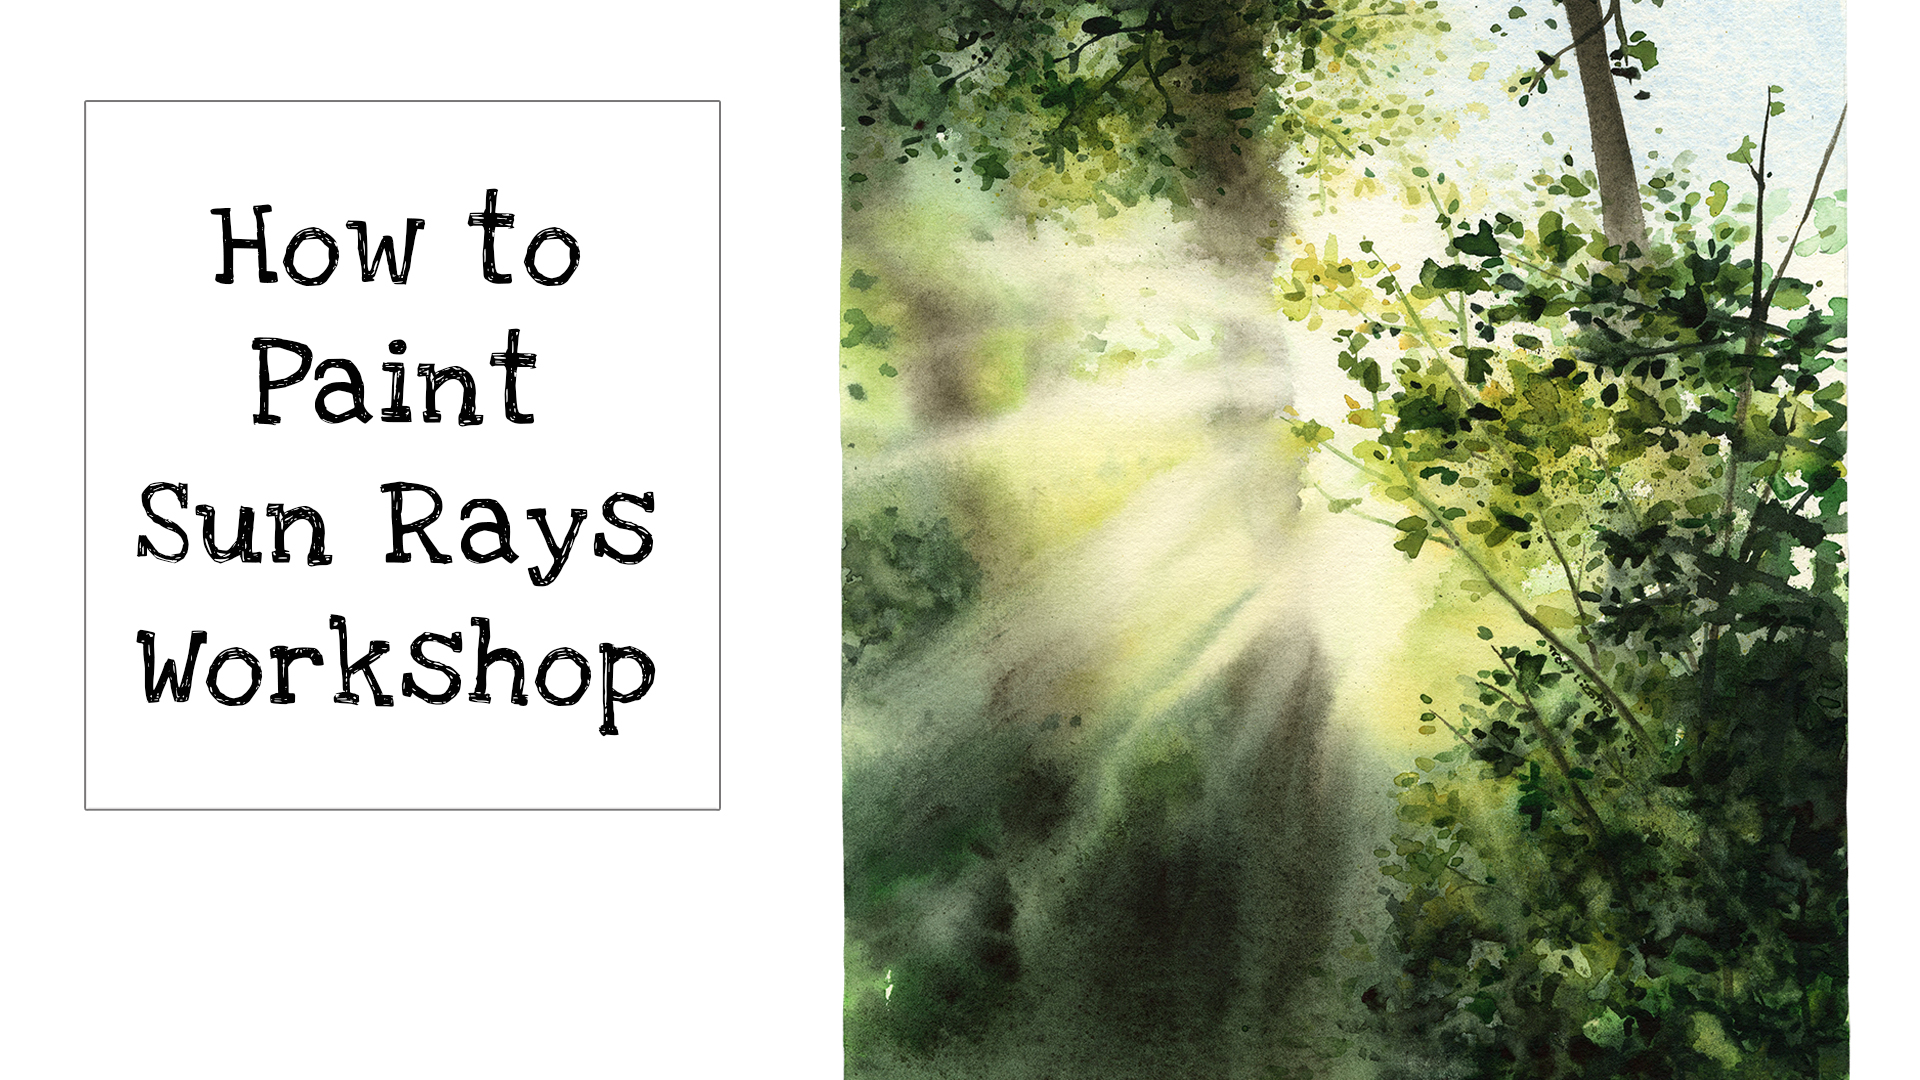 How to Paint Sun Rays with Watercolors